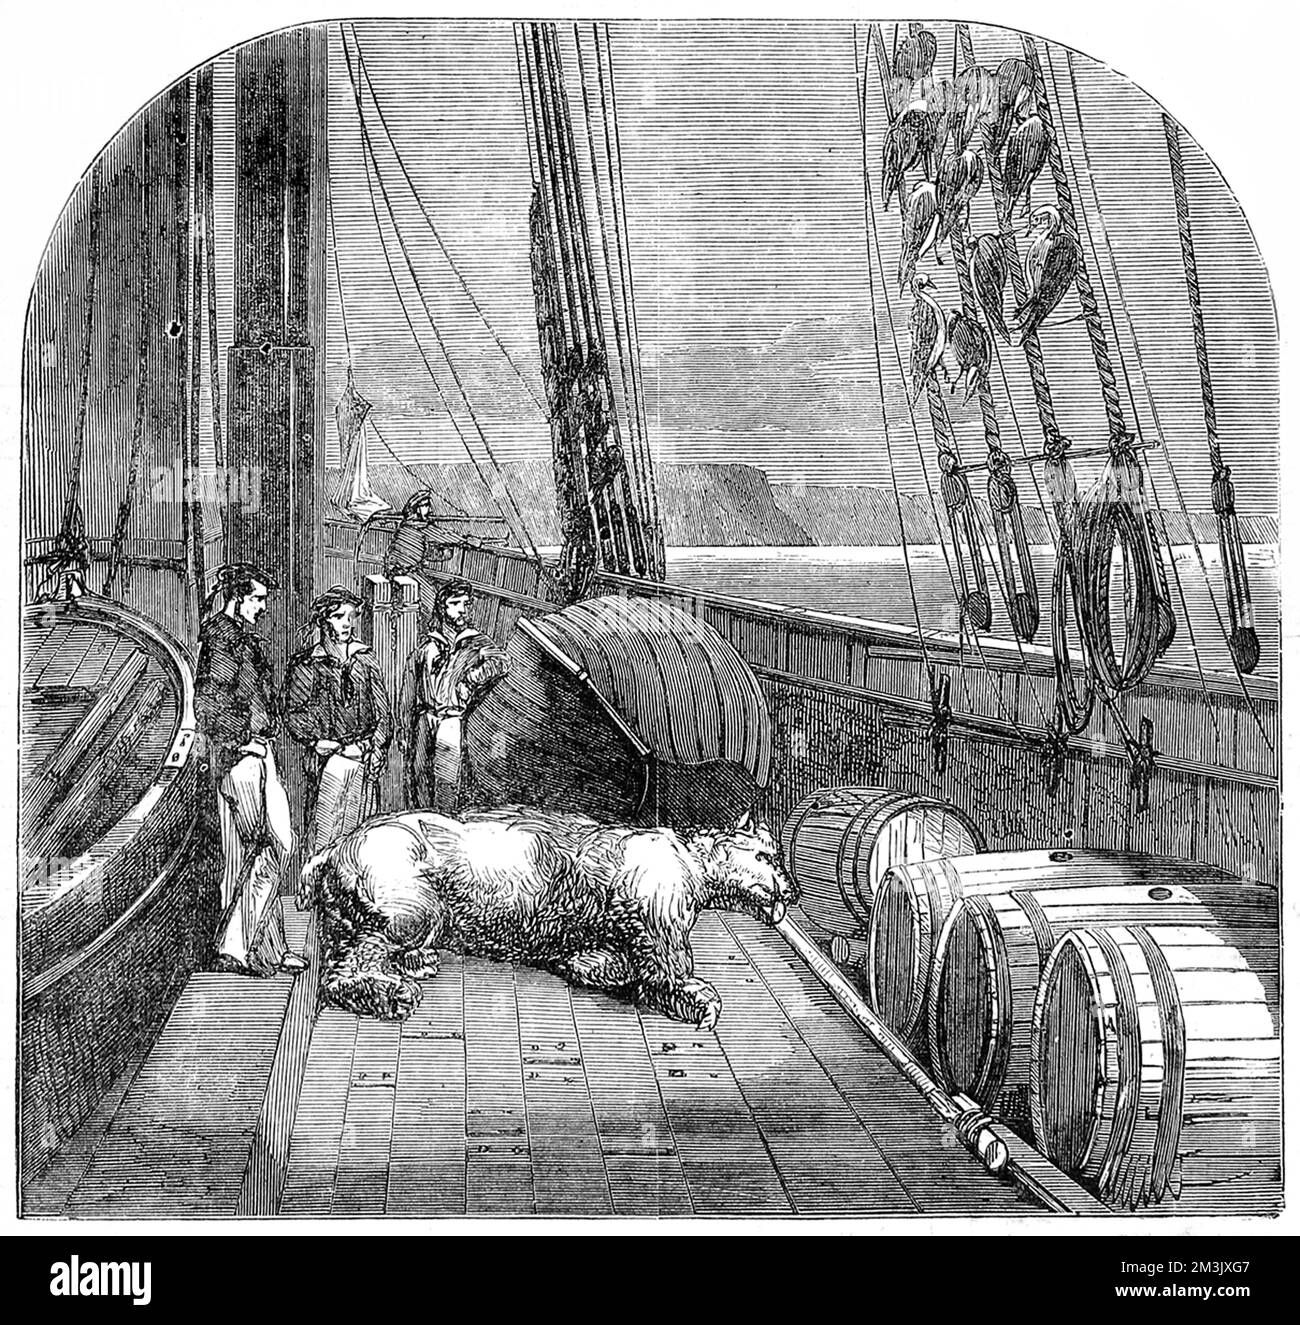 A dead polar bear on the deck of the yacht 'Fox', 1859. The 'Fox', commanded by Captain F.L. McClintock, went to the Arctic region in search of Sir John Franklin's ill-fated Arctic expedition of 1845.    In 1845 the British Admiralty sent two polar exploration ships, HMS 'Erebus' and HMS 'Terror', to look for the Northwest passage round the northern coast of Canada. The expedition, commanded by Sir John Franklin, disappeared from view late in 1845 and none of the men were ever seen again.   In fact the ships made it to the King William Island region, then got stuck in the ice. With su Stock Photo